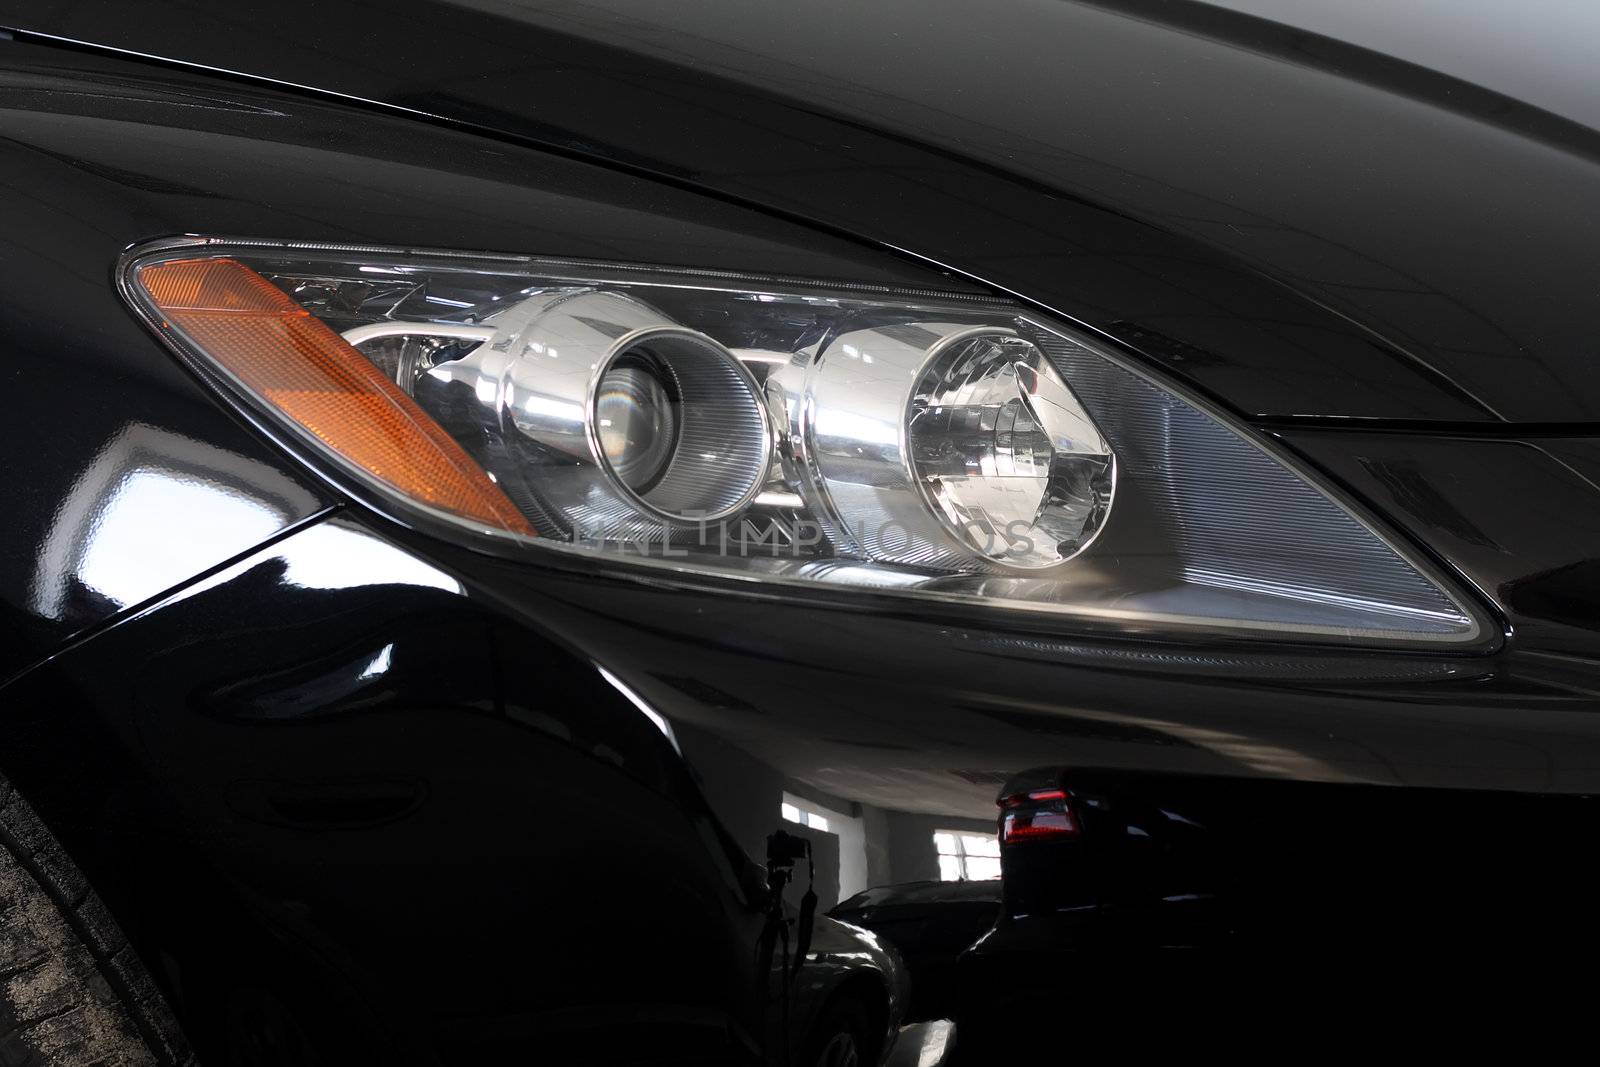 Close-up view of front lights of a black car.